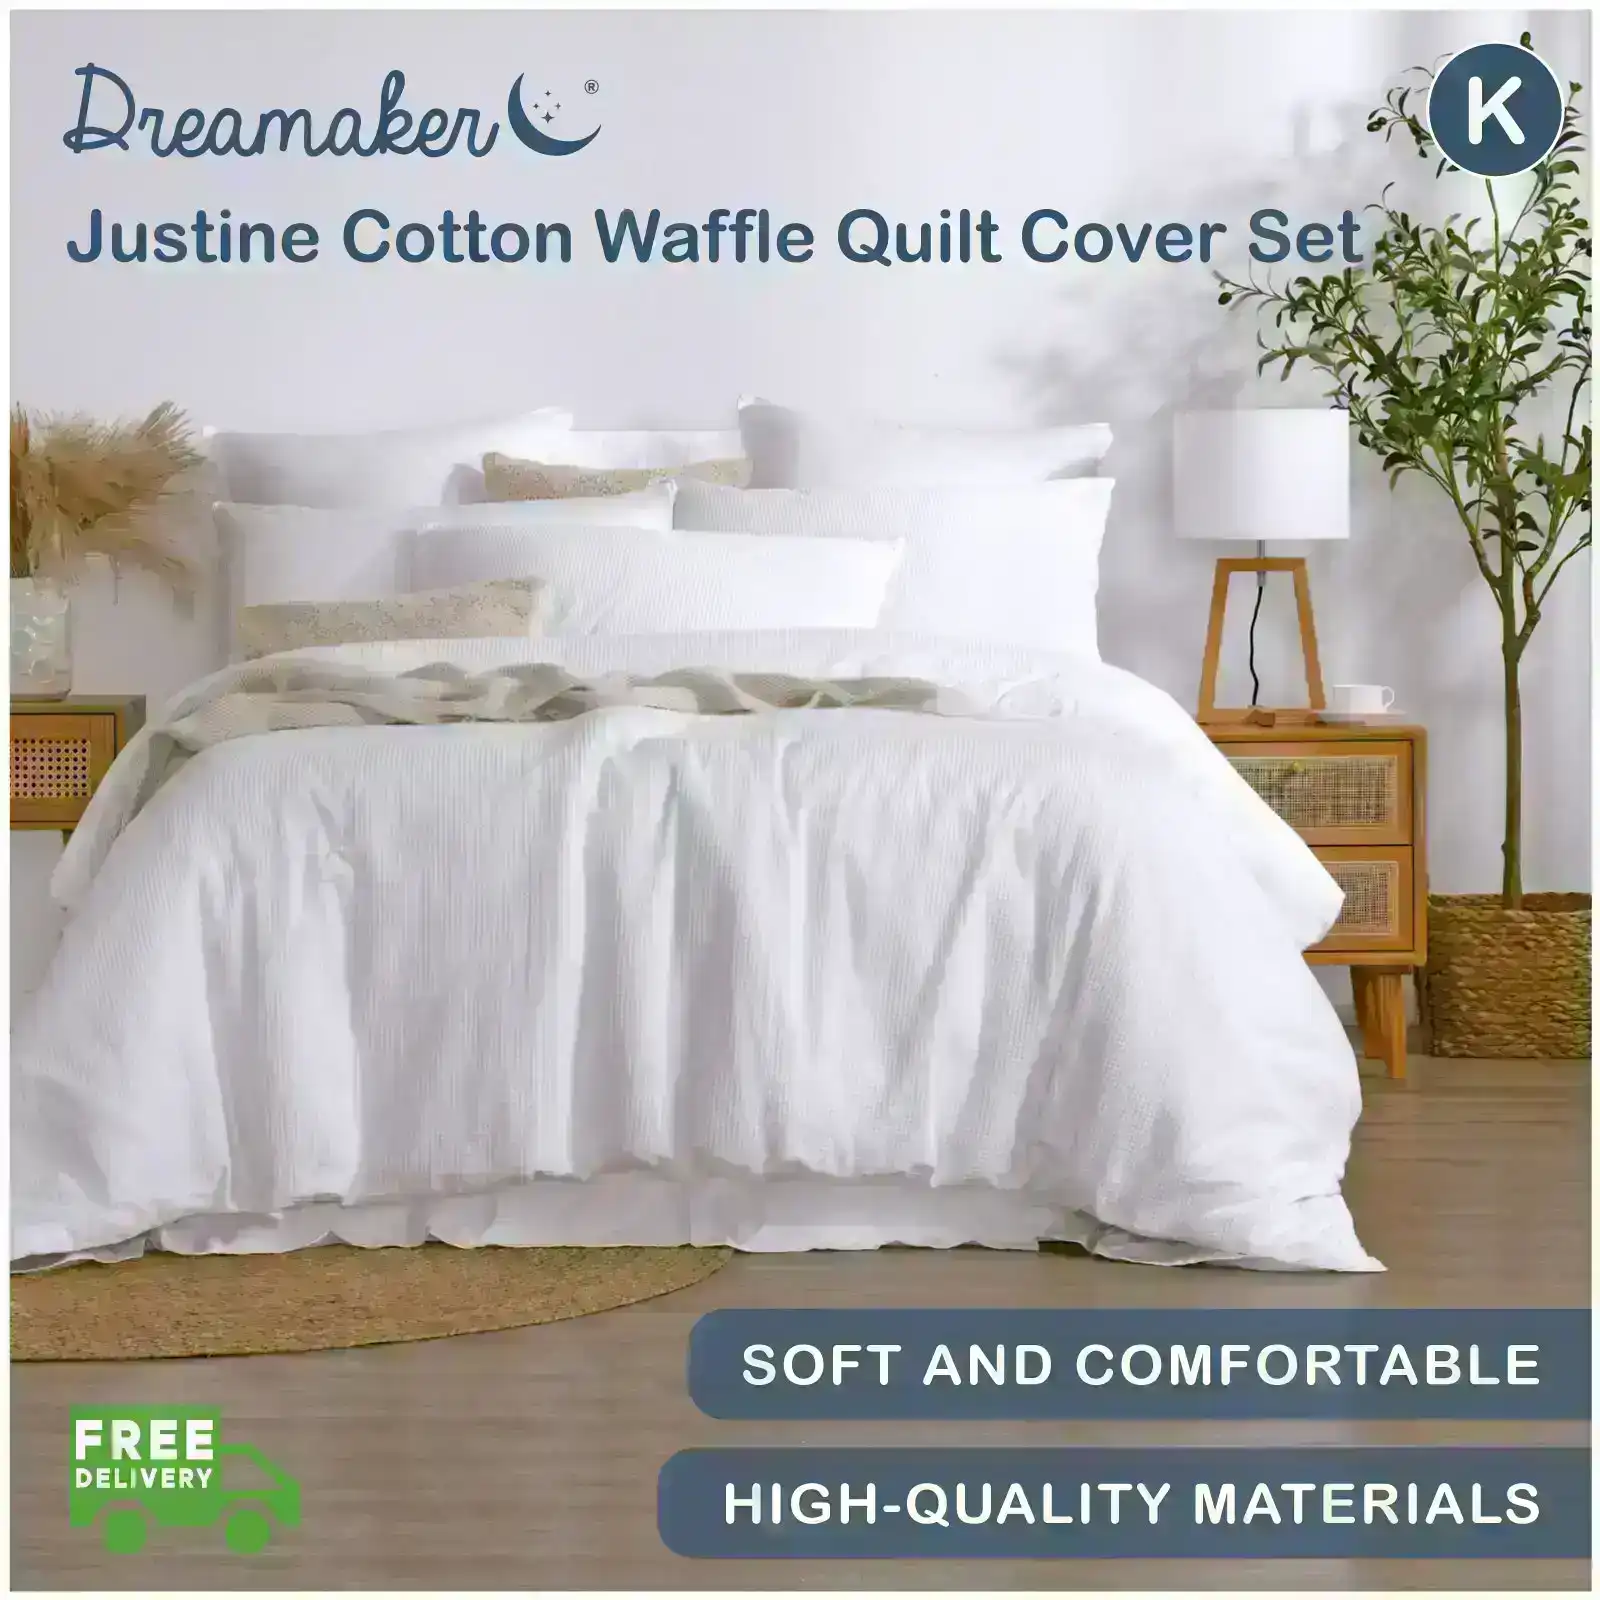 Dreamaker Justine Cotton Waffle Quilt Cover Set White King Bed